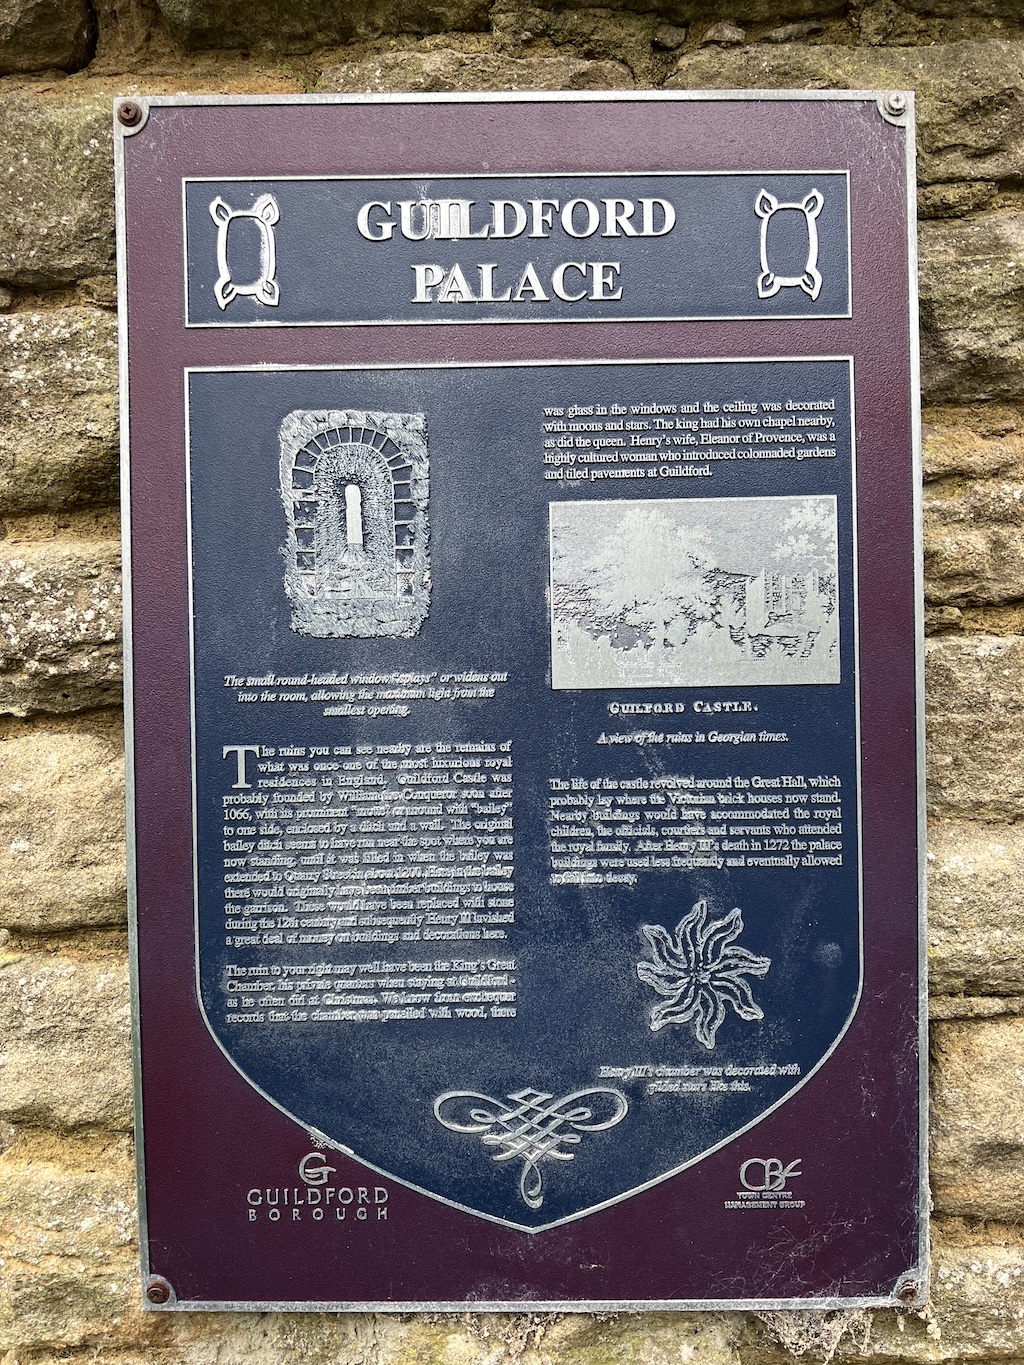 Blue plaque in Guildford for Guildford Palace